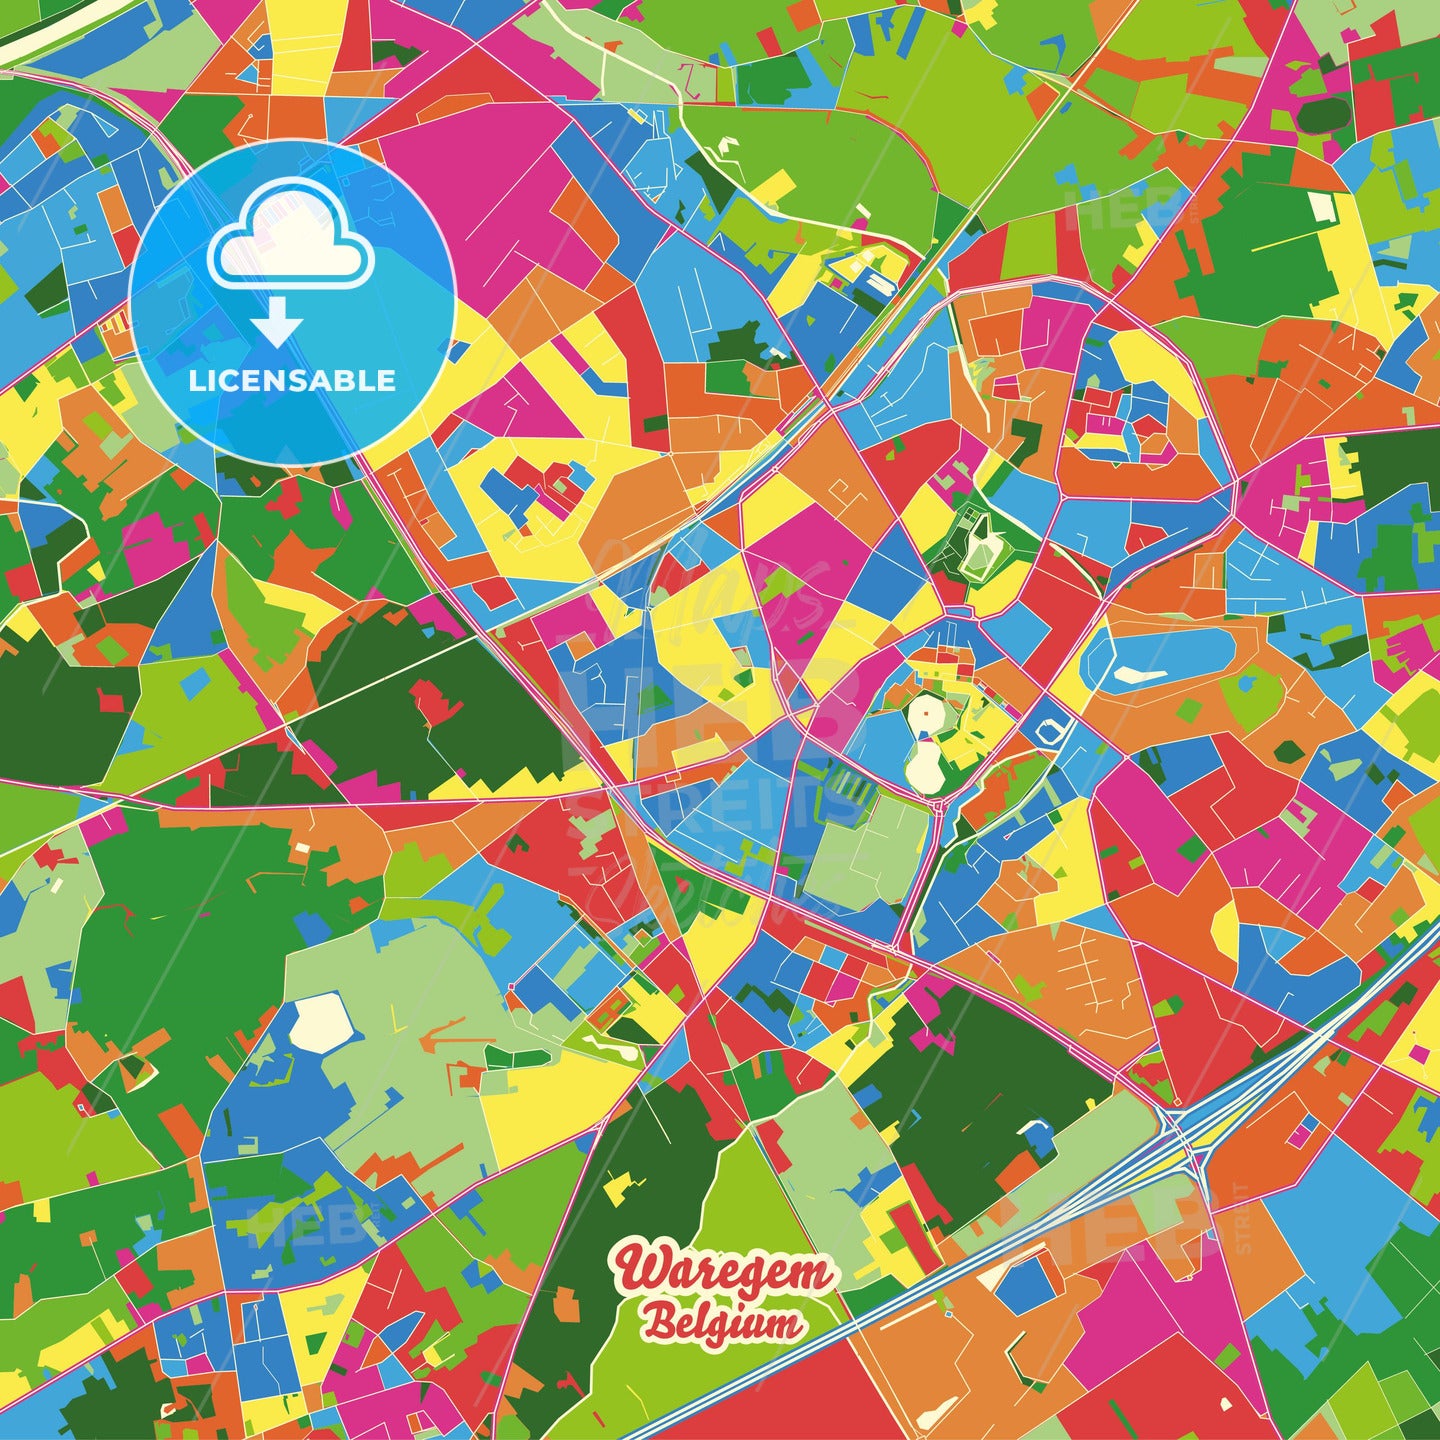 Waregem, Belgium Crazy Colorful Street Map Poster Template - HEBSTREITS Sketches